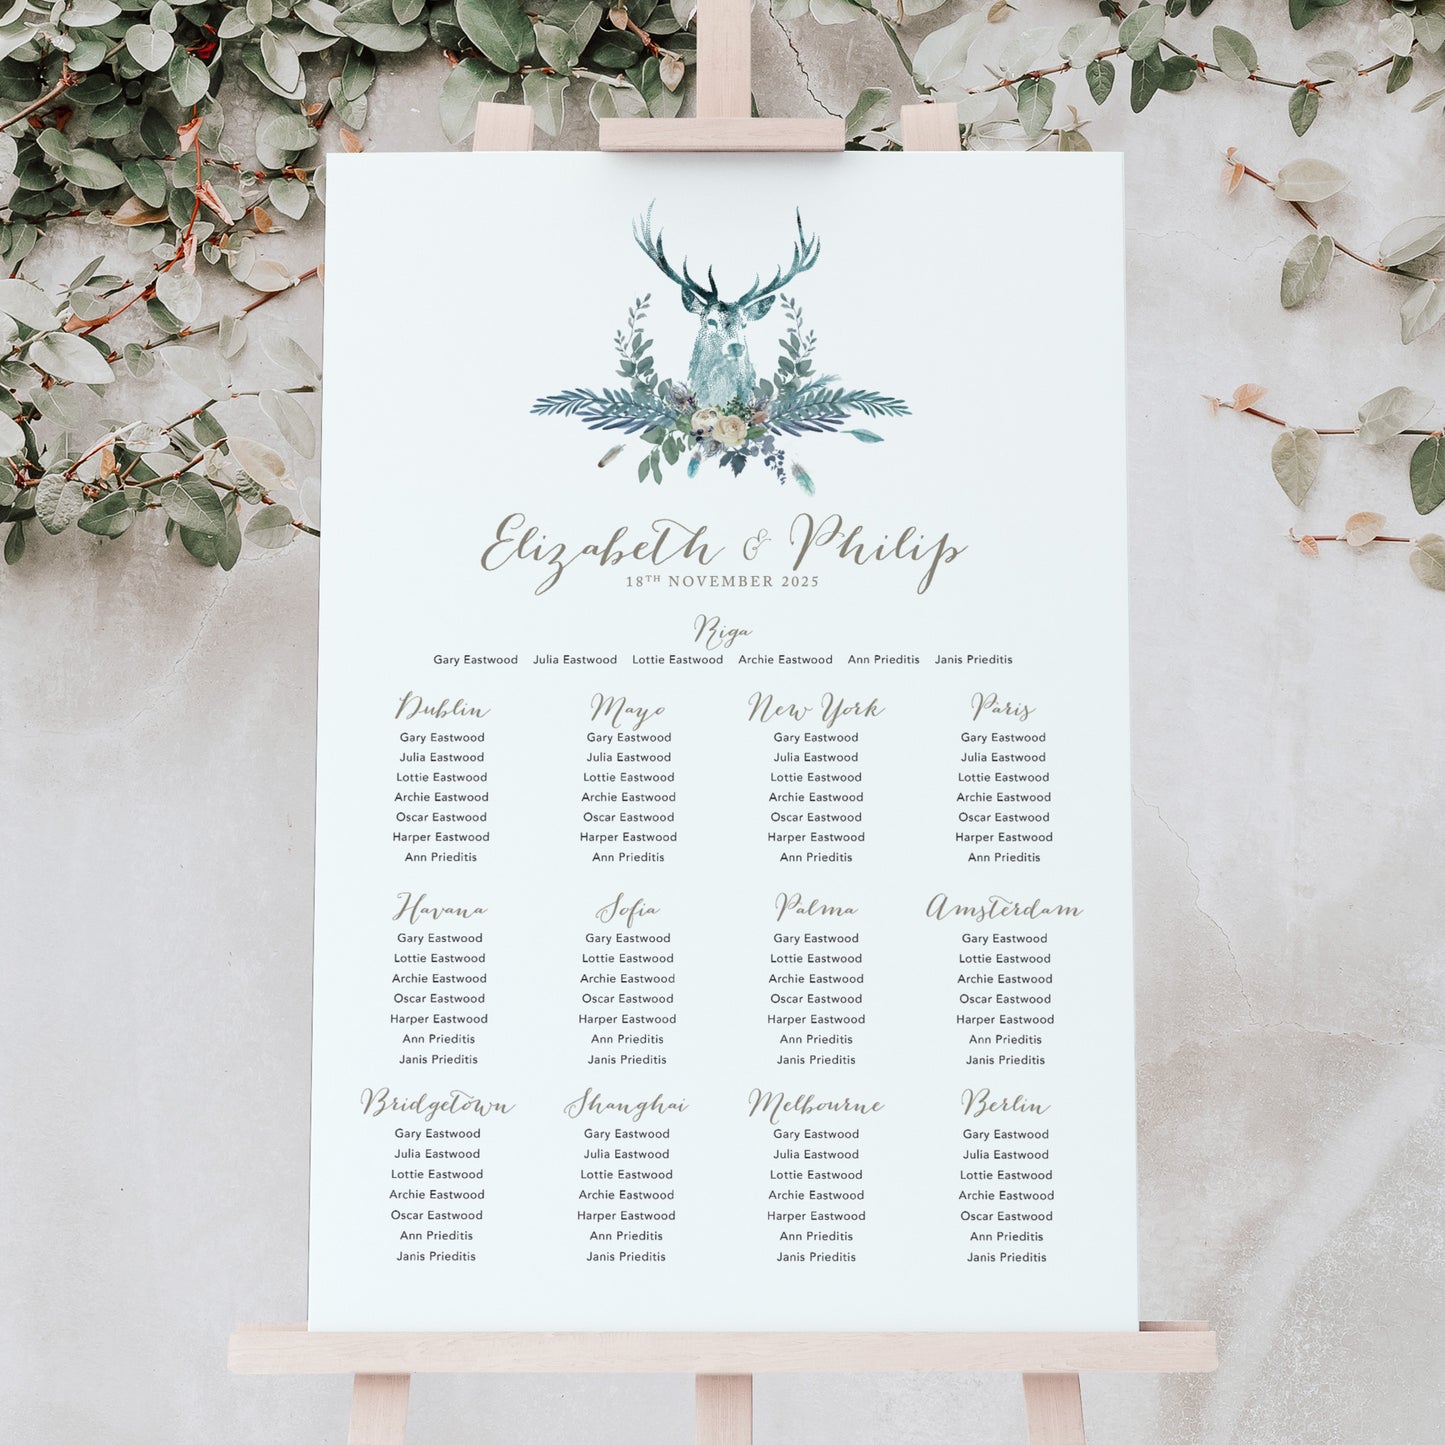 blue wedding seating chart for a winter wedding